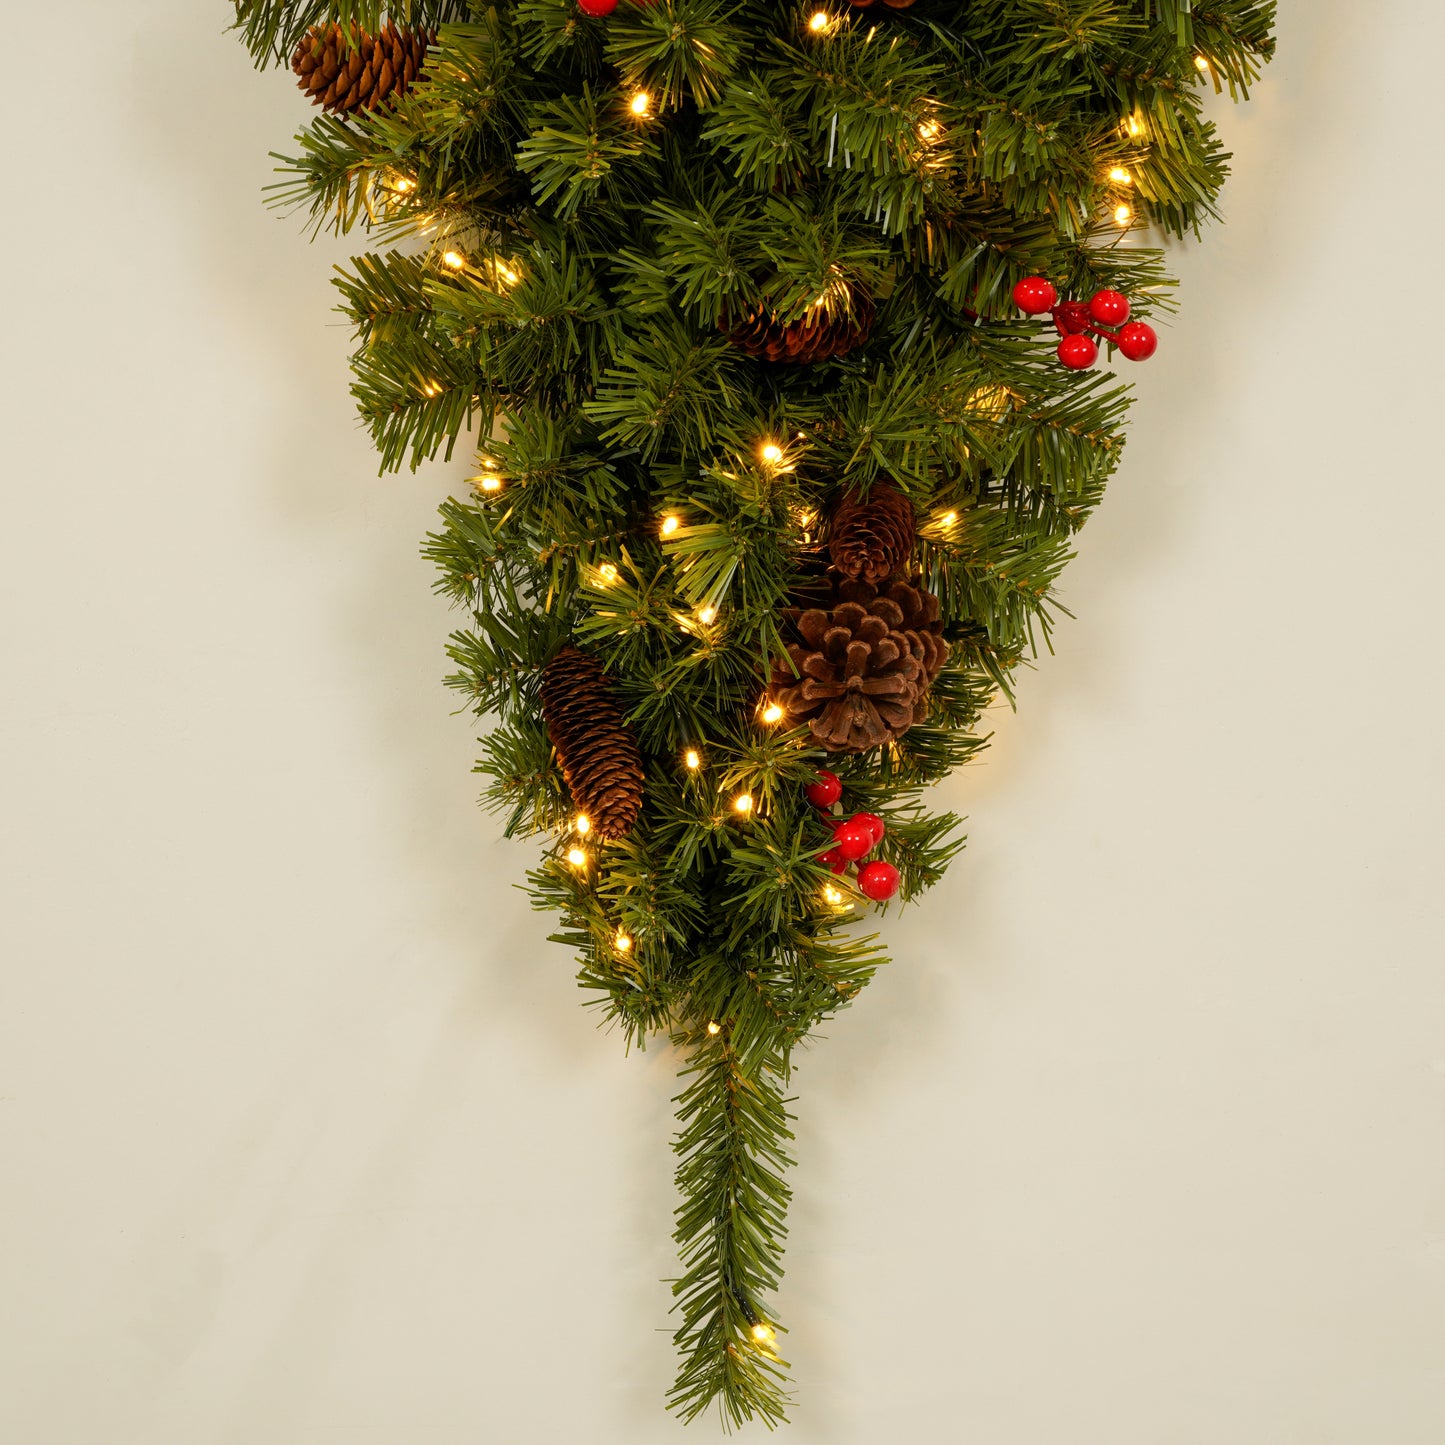 Upside Down Hanging Quarter Christmas Tree with 300 LED Warm White Lights